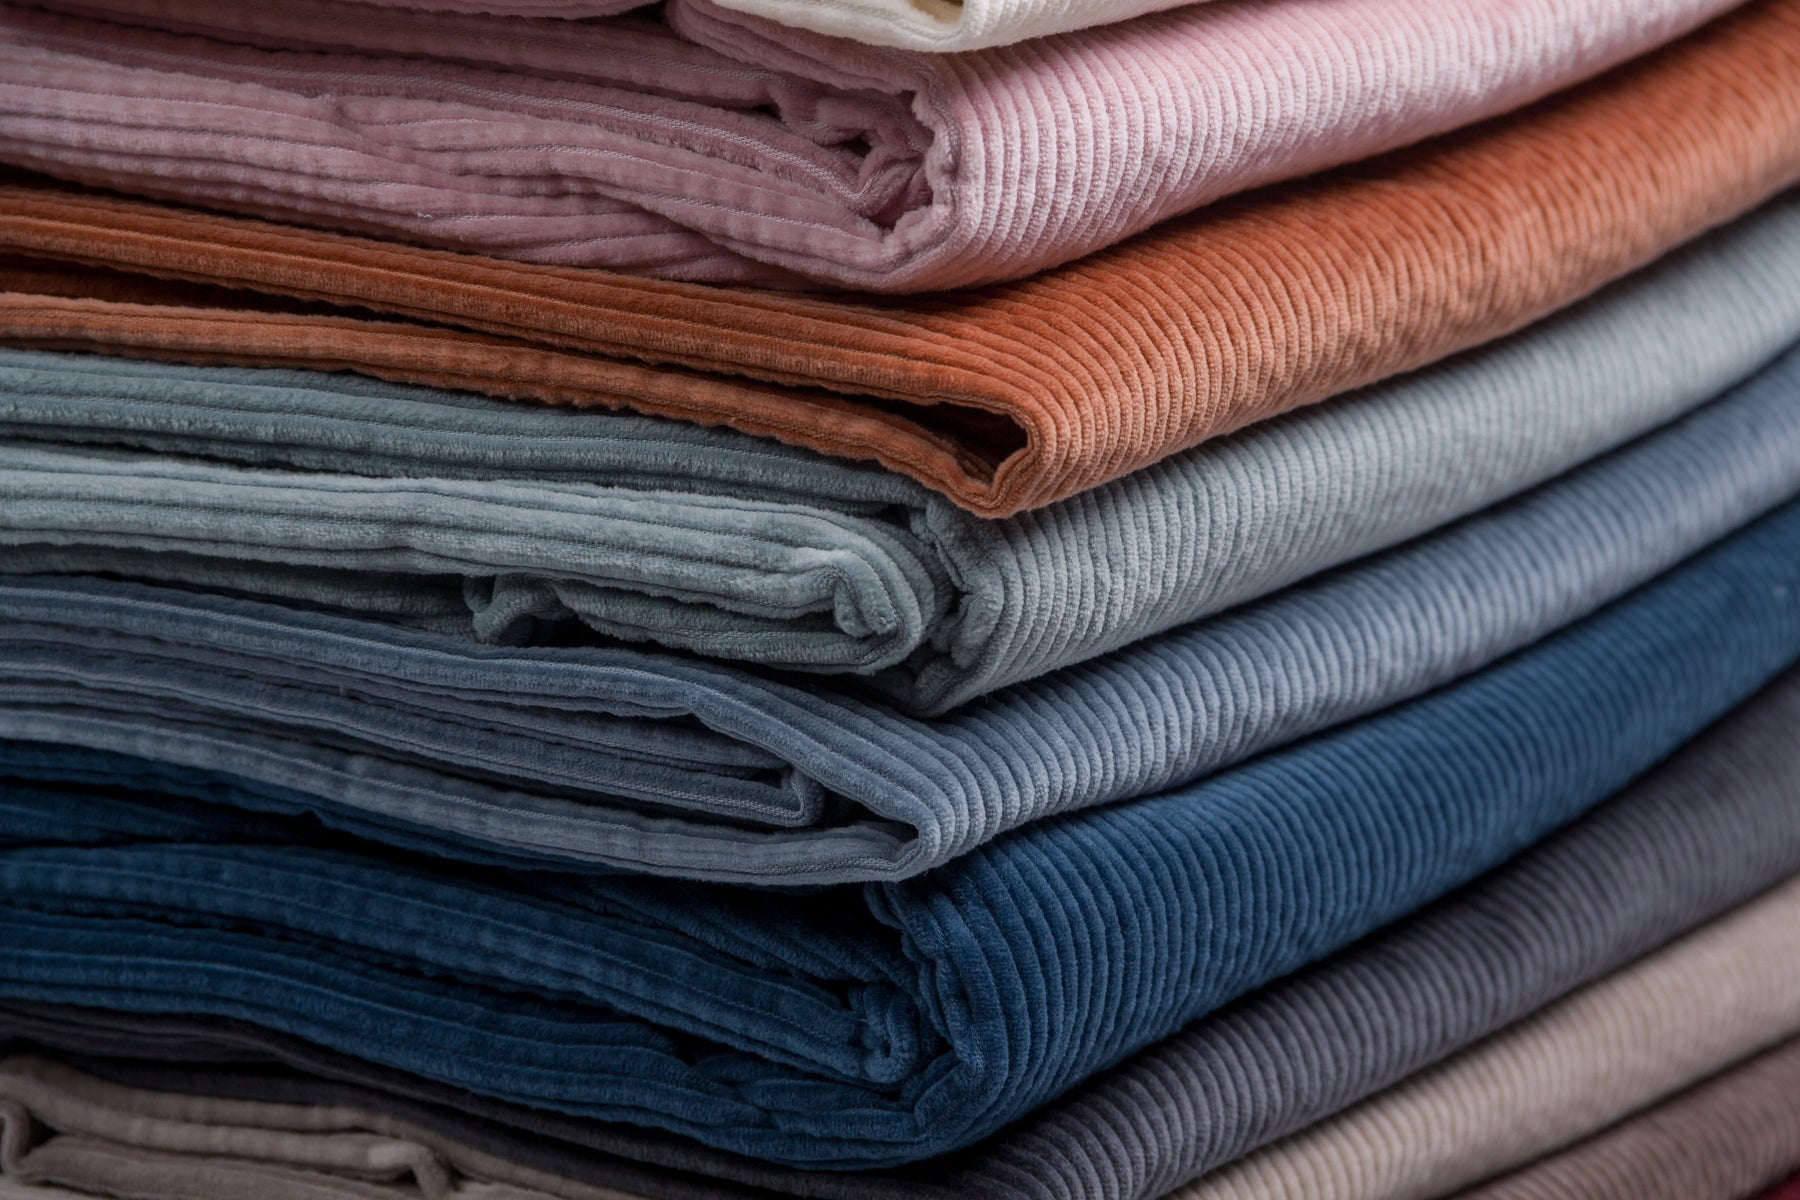 Corduroy - A Versatile Fabric with History